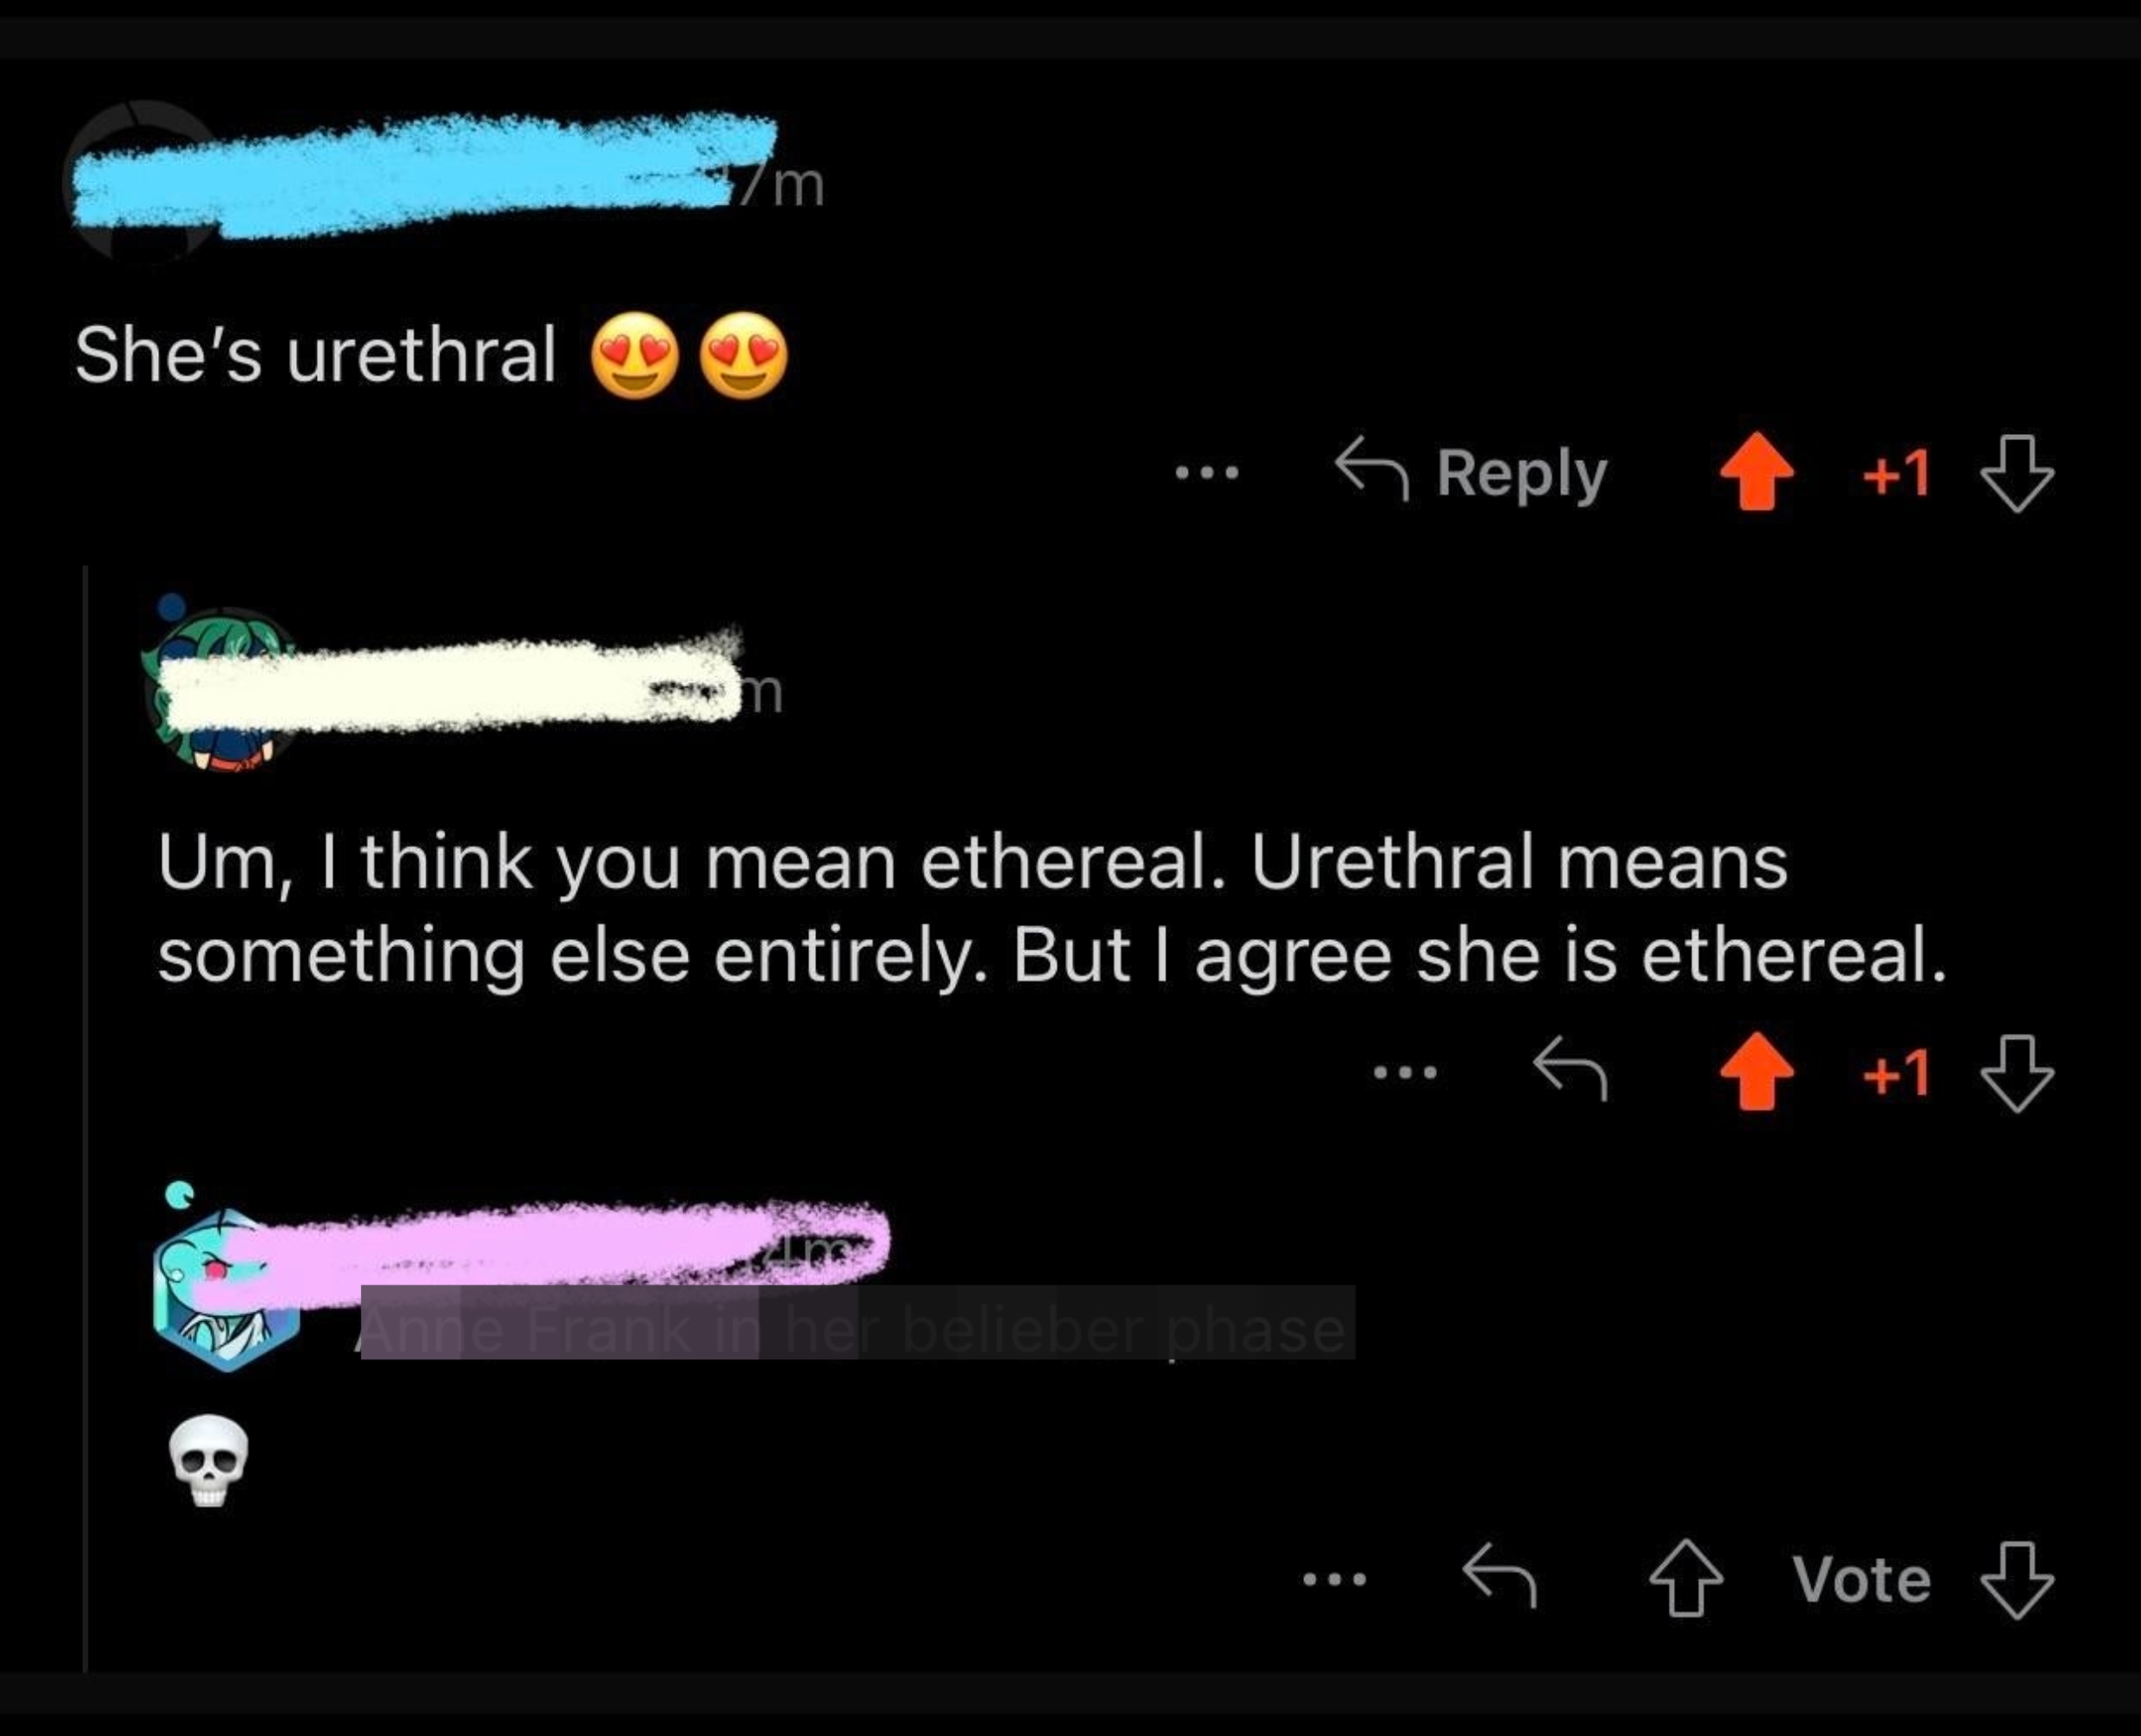 &quot;She&#x27;s urethral&quot;; response: &quot;Um, I think you mean ethereal; urethral means something else entirely, but I agree she is ethereal&quot;